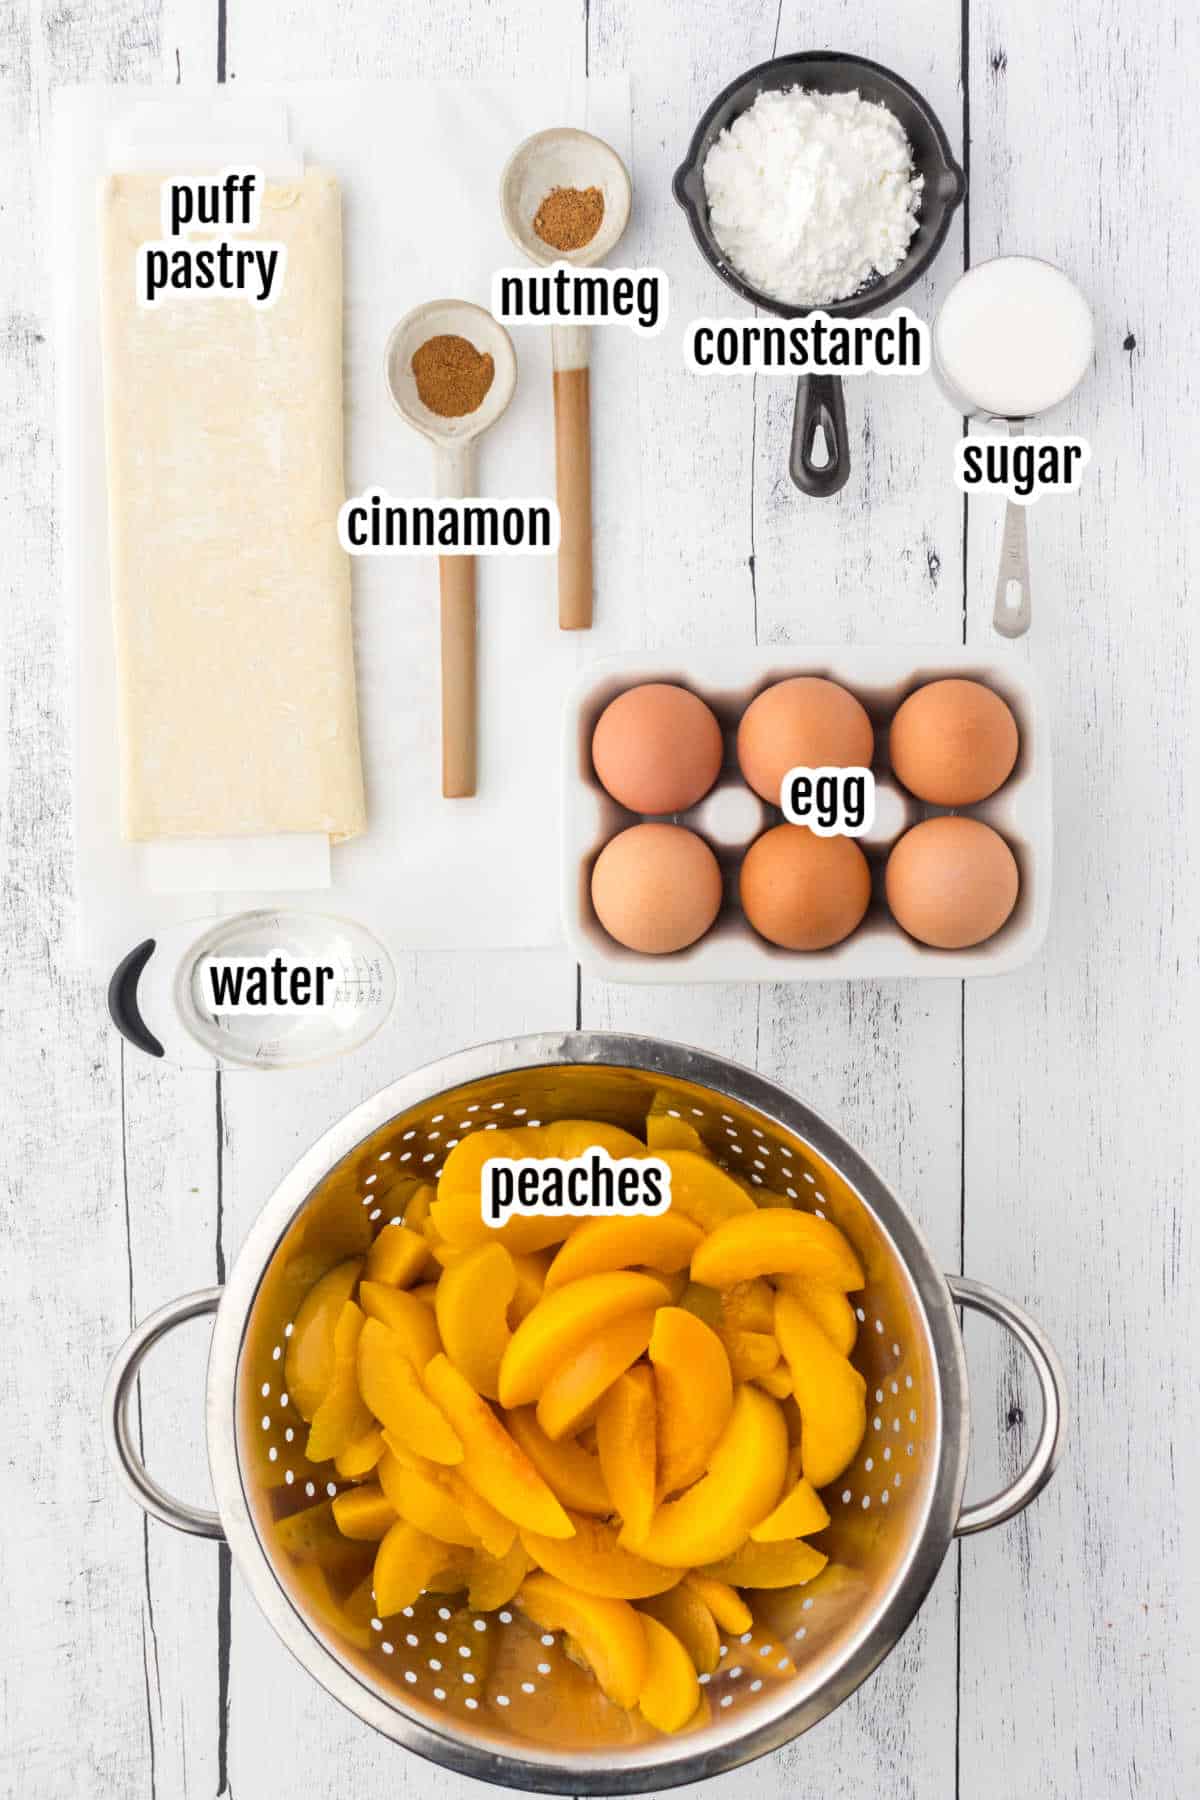 Image of the ingredients needed to make the Peach cobbler dessert. 